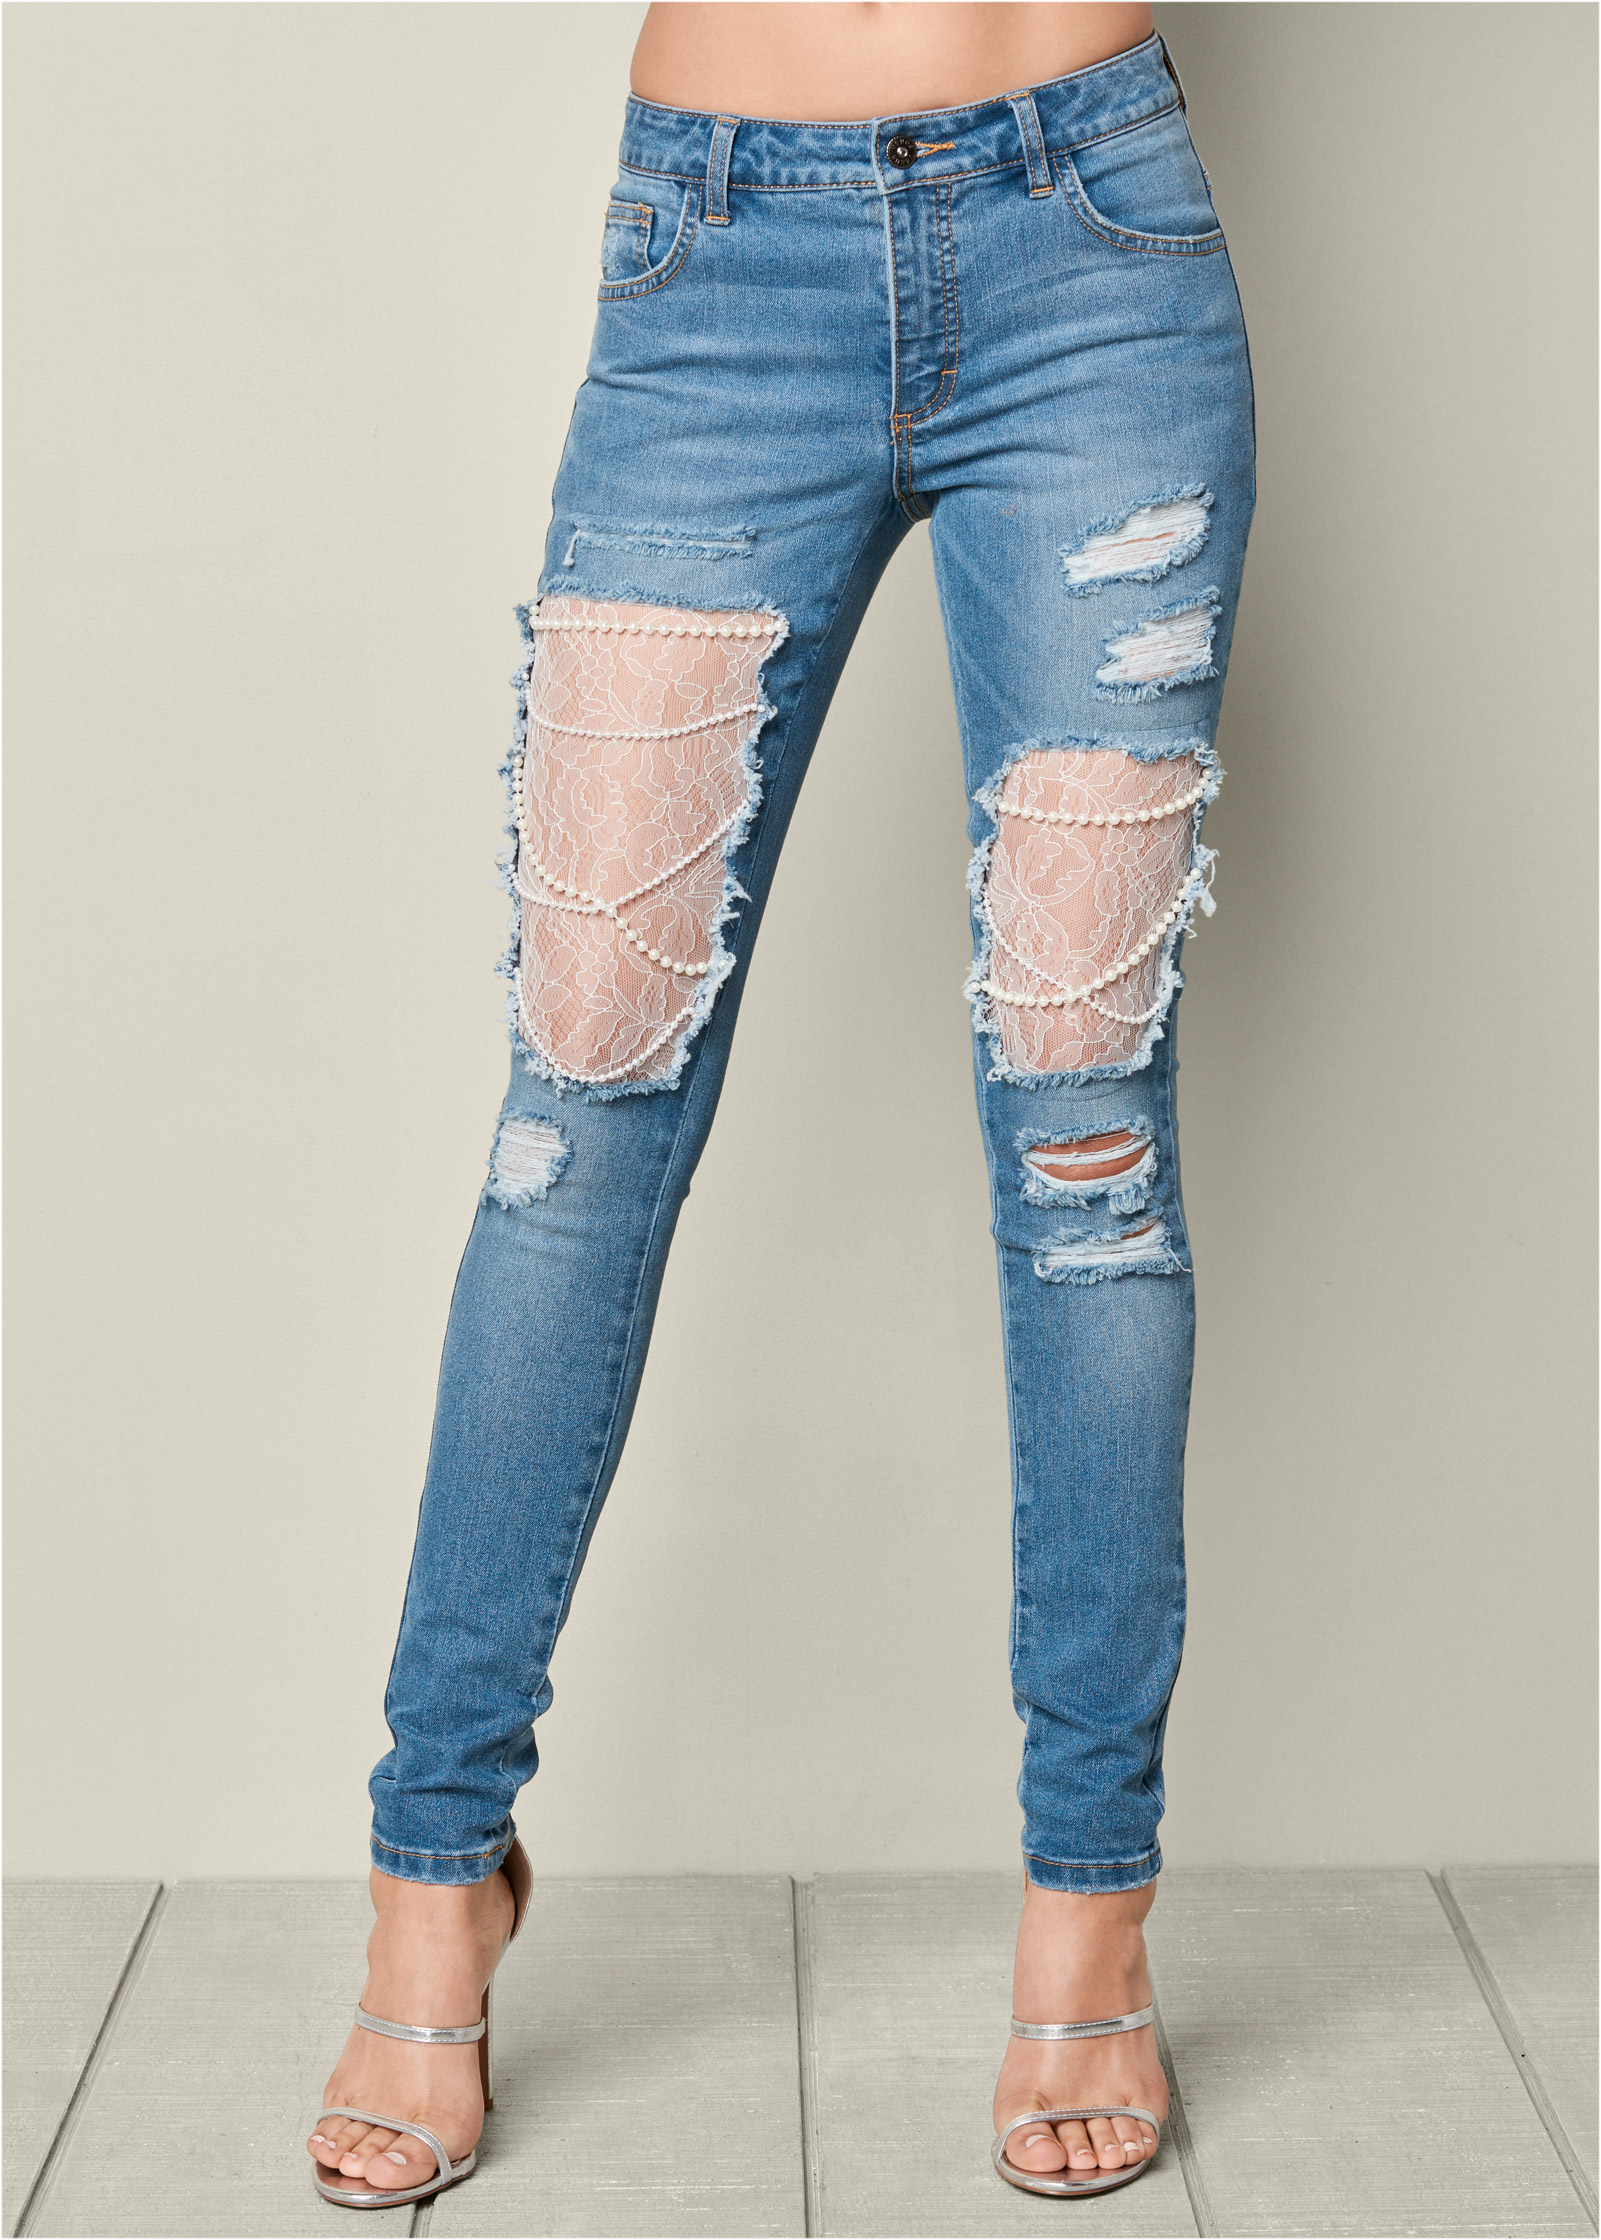 LACE AND PEARL RIPPED JEANS in Medium Wash | VENUS